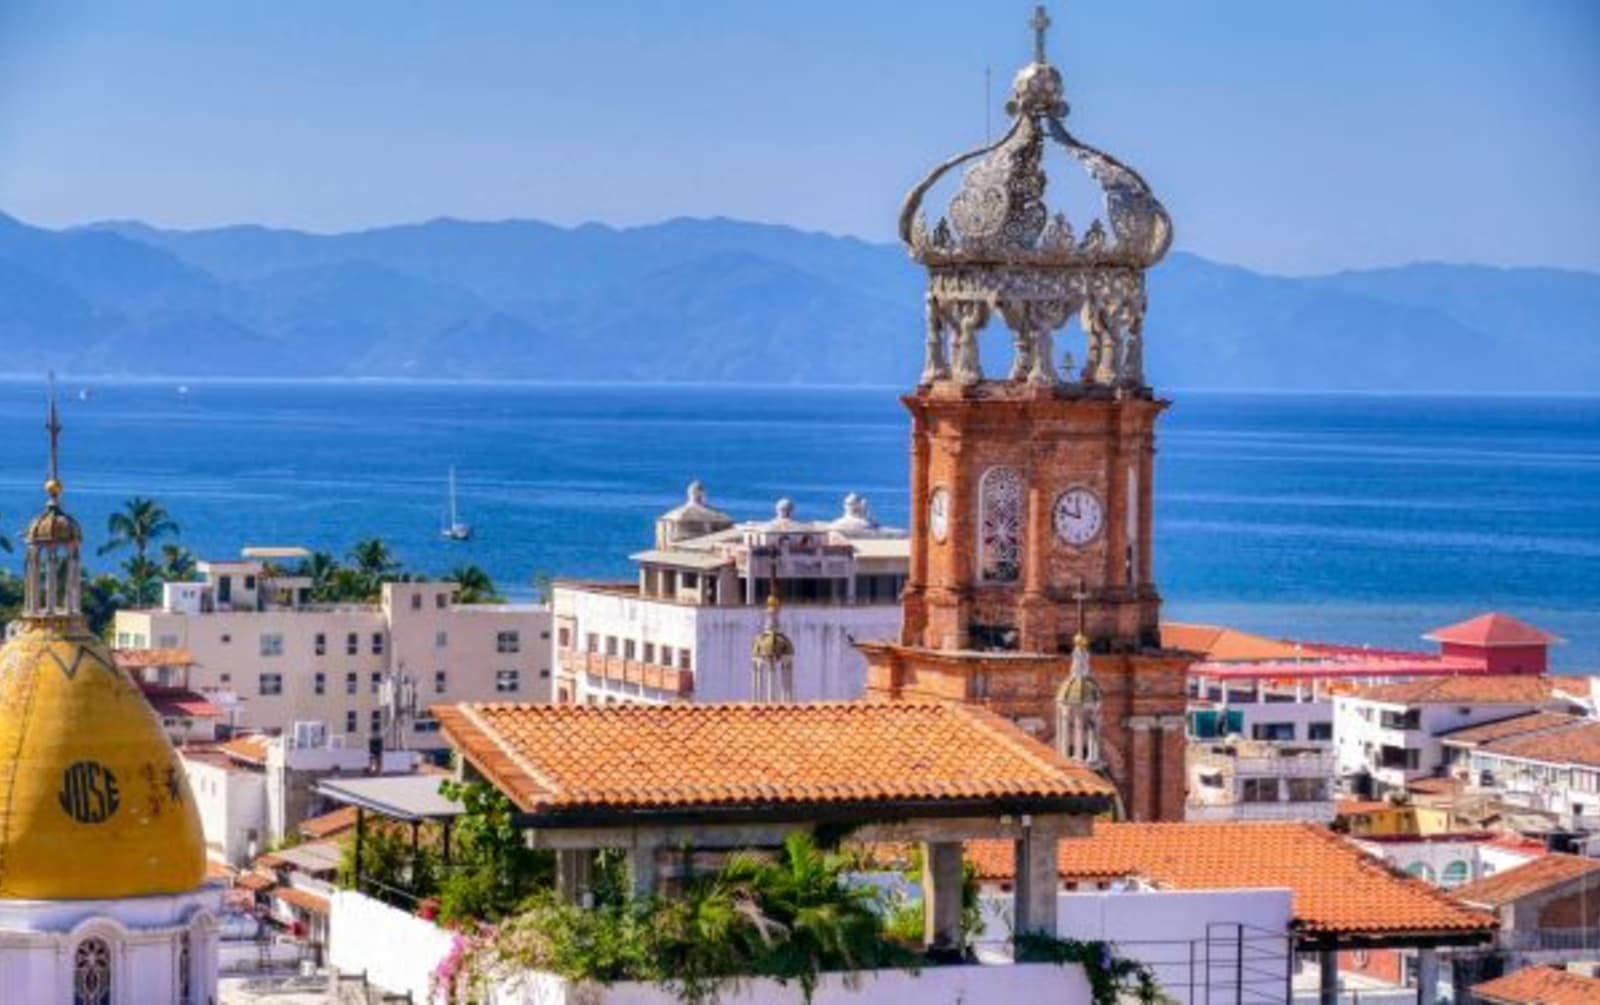 Town of Puerto Vallarta with town clock as focal point and ocean/mountains in background